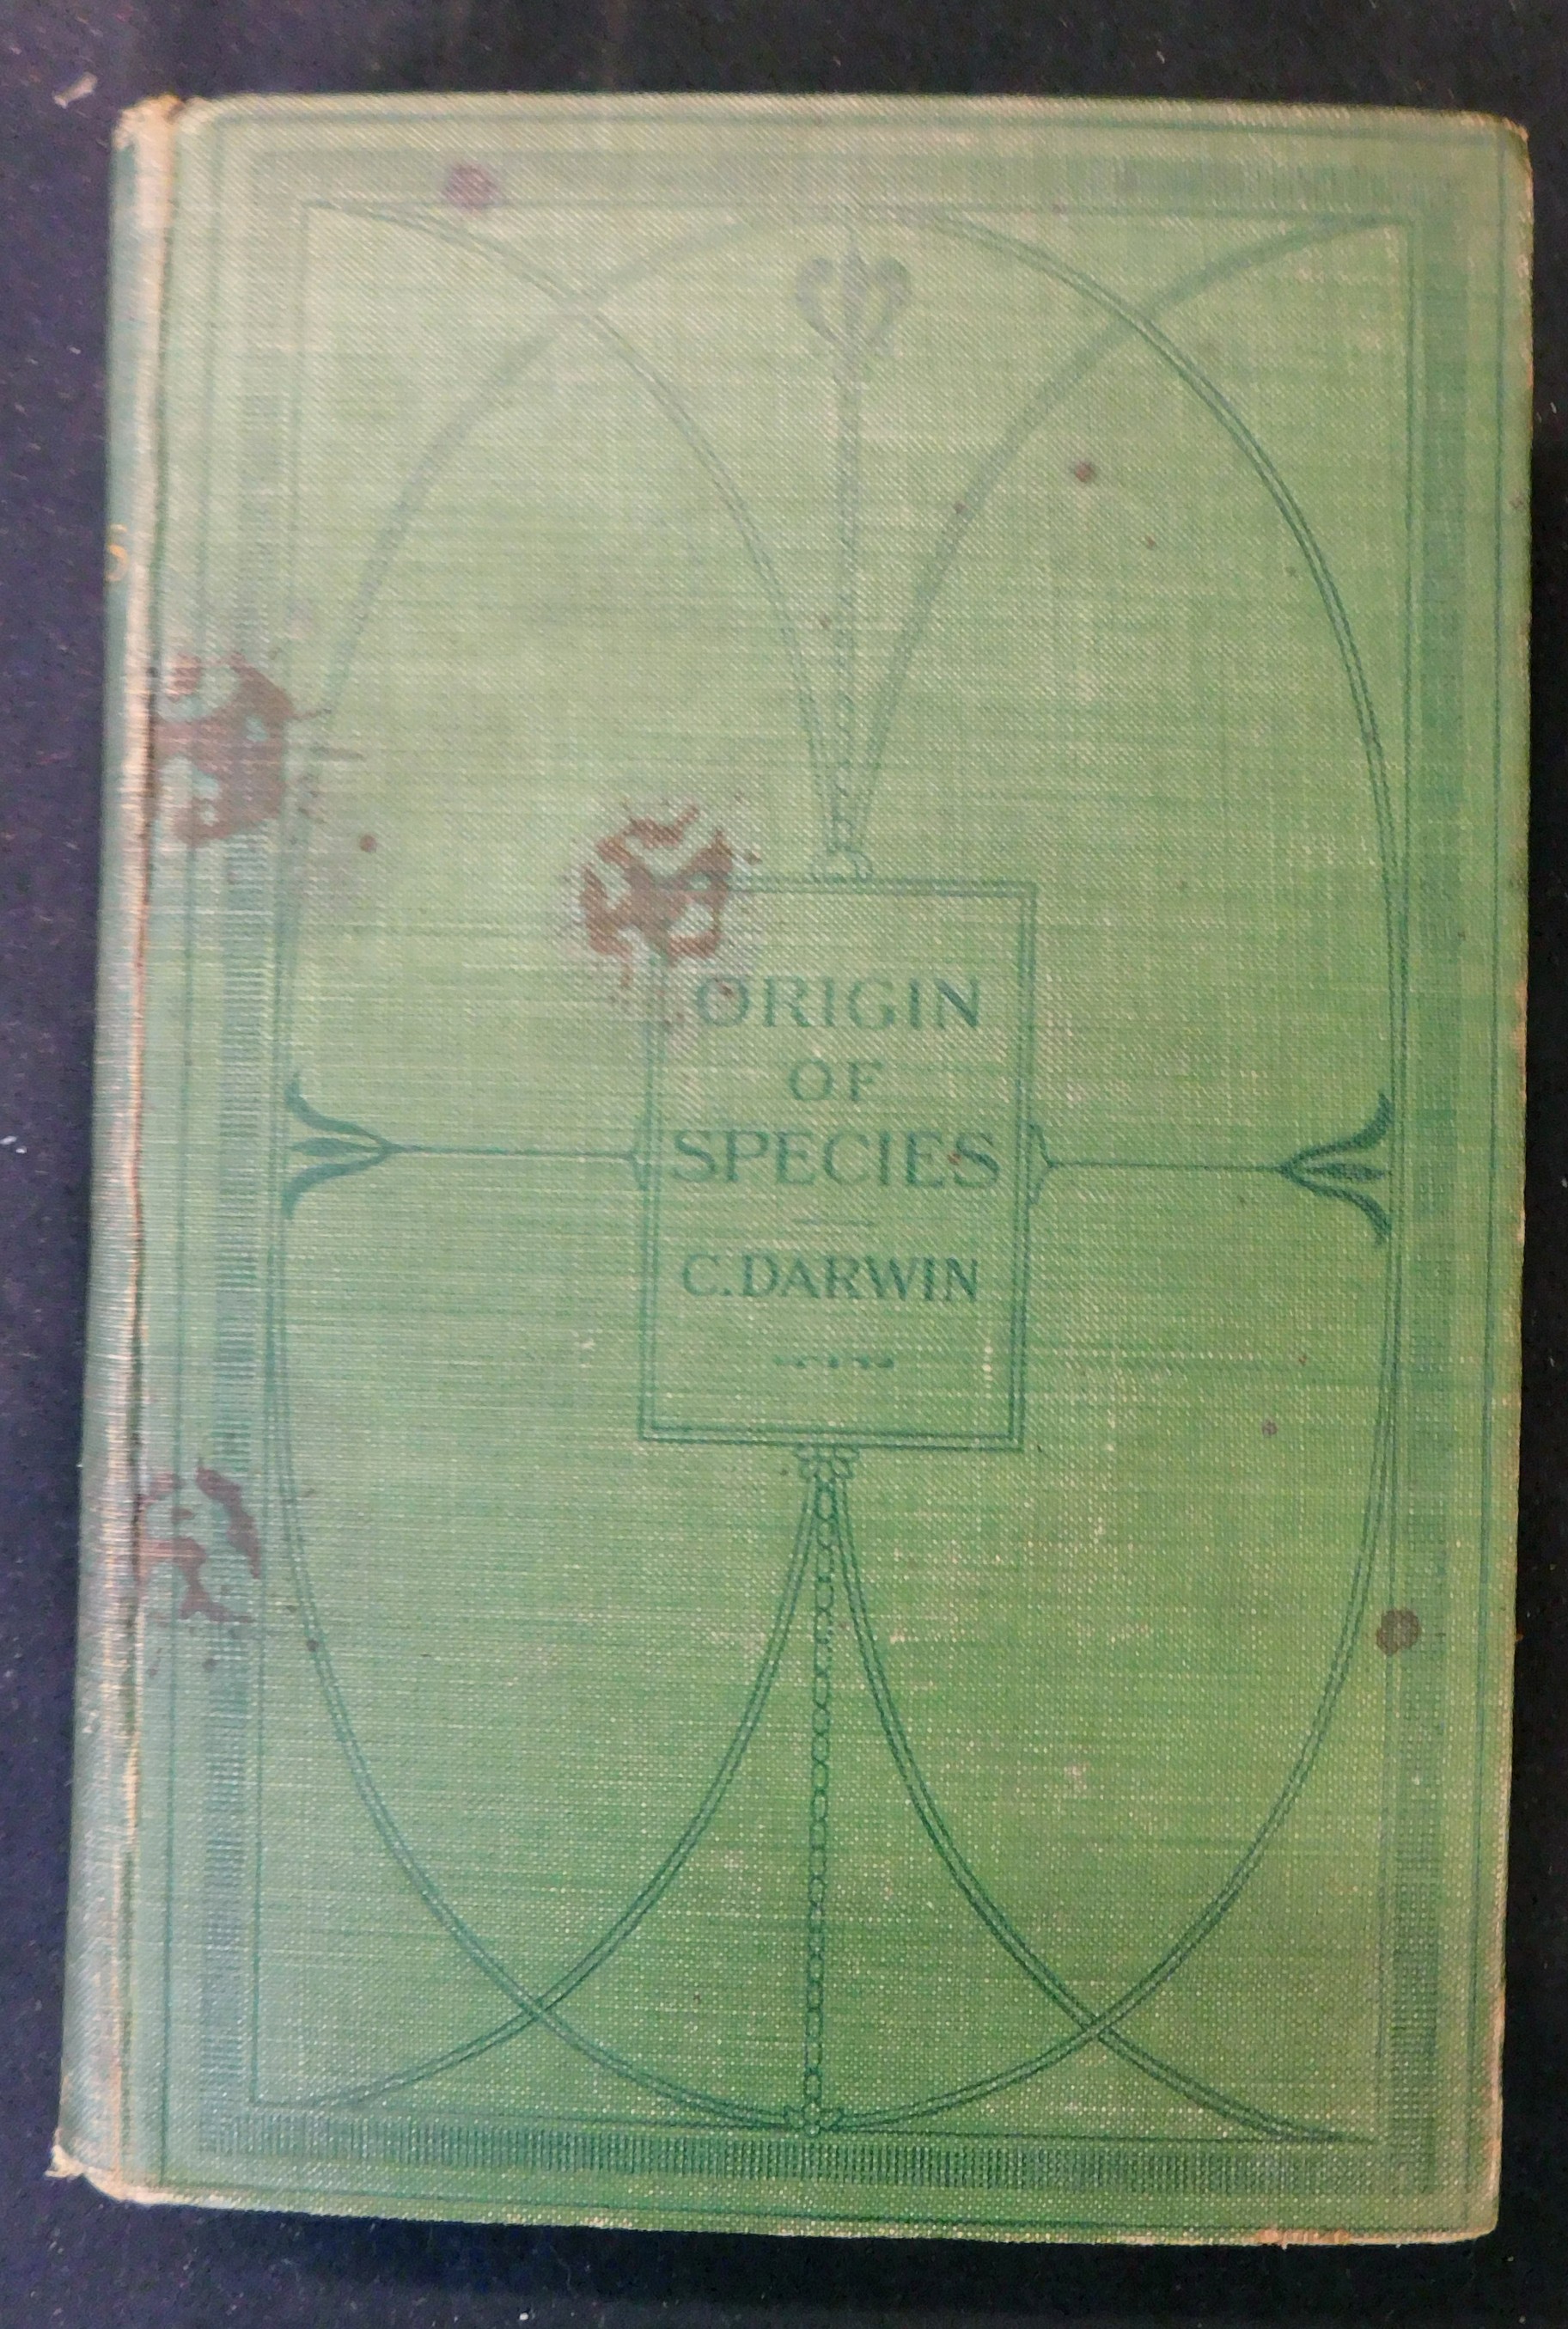 CHARLES DARWIN: THE ORIGIN OF SPECIES BY MEANS OF NATURAL SELECTION..., London, John Murray, 1900, - Image 2 of 3